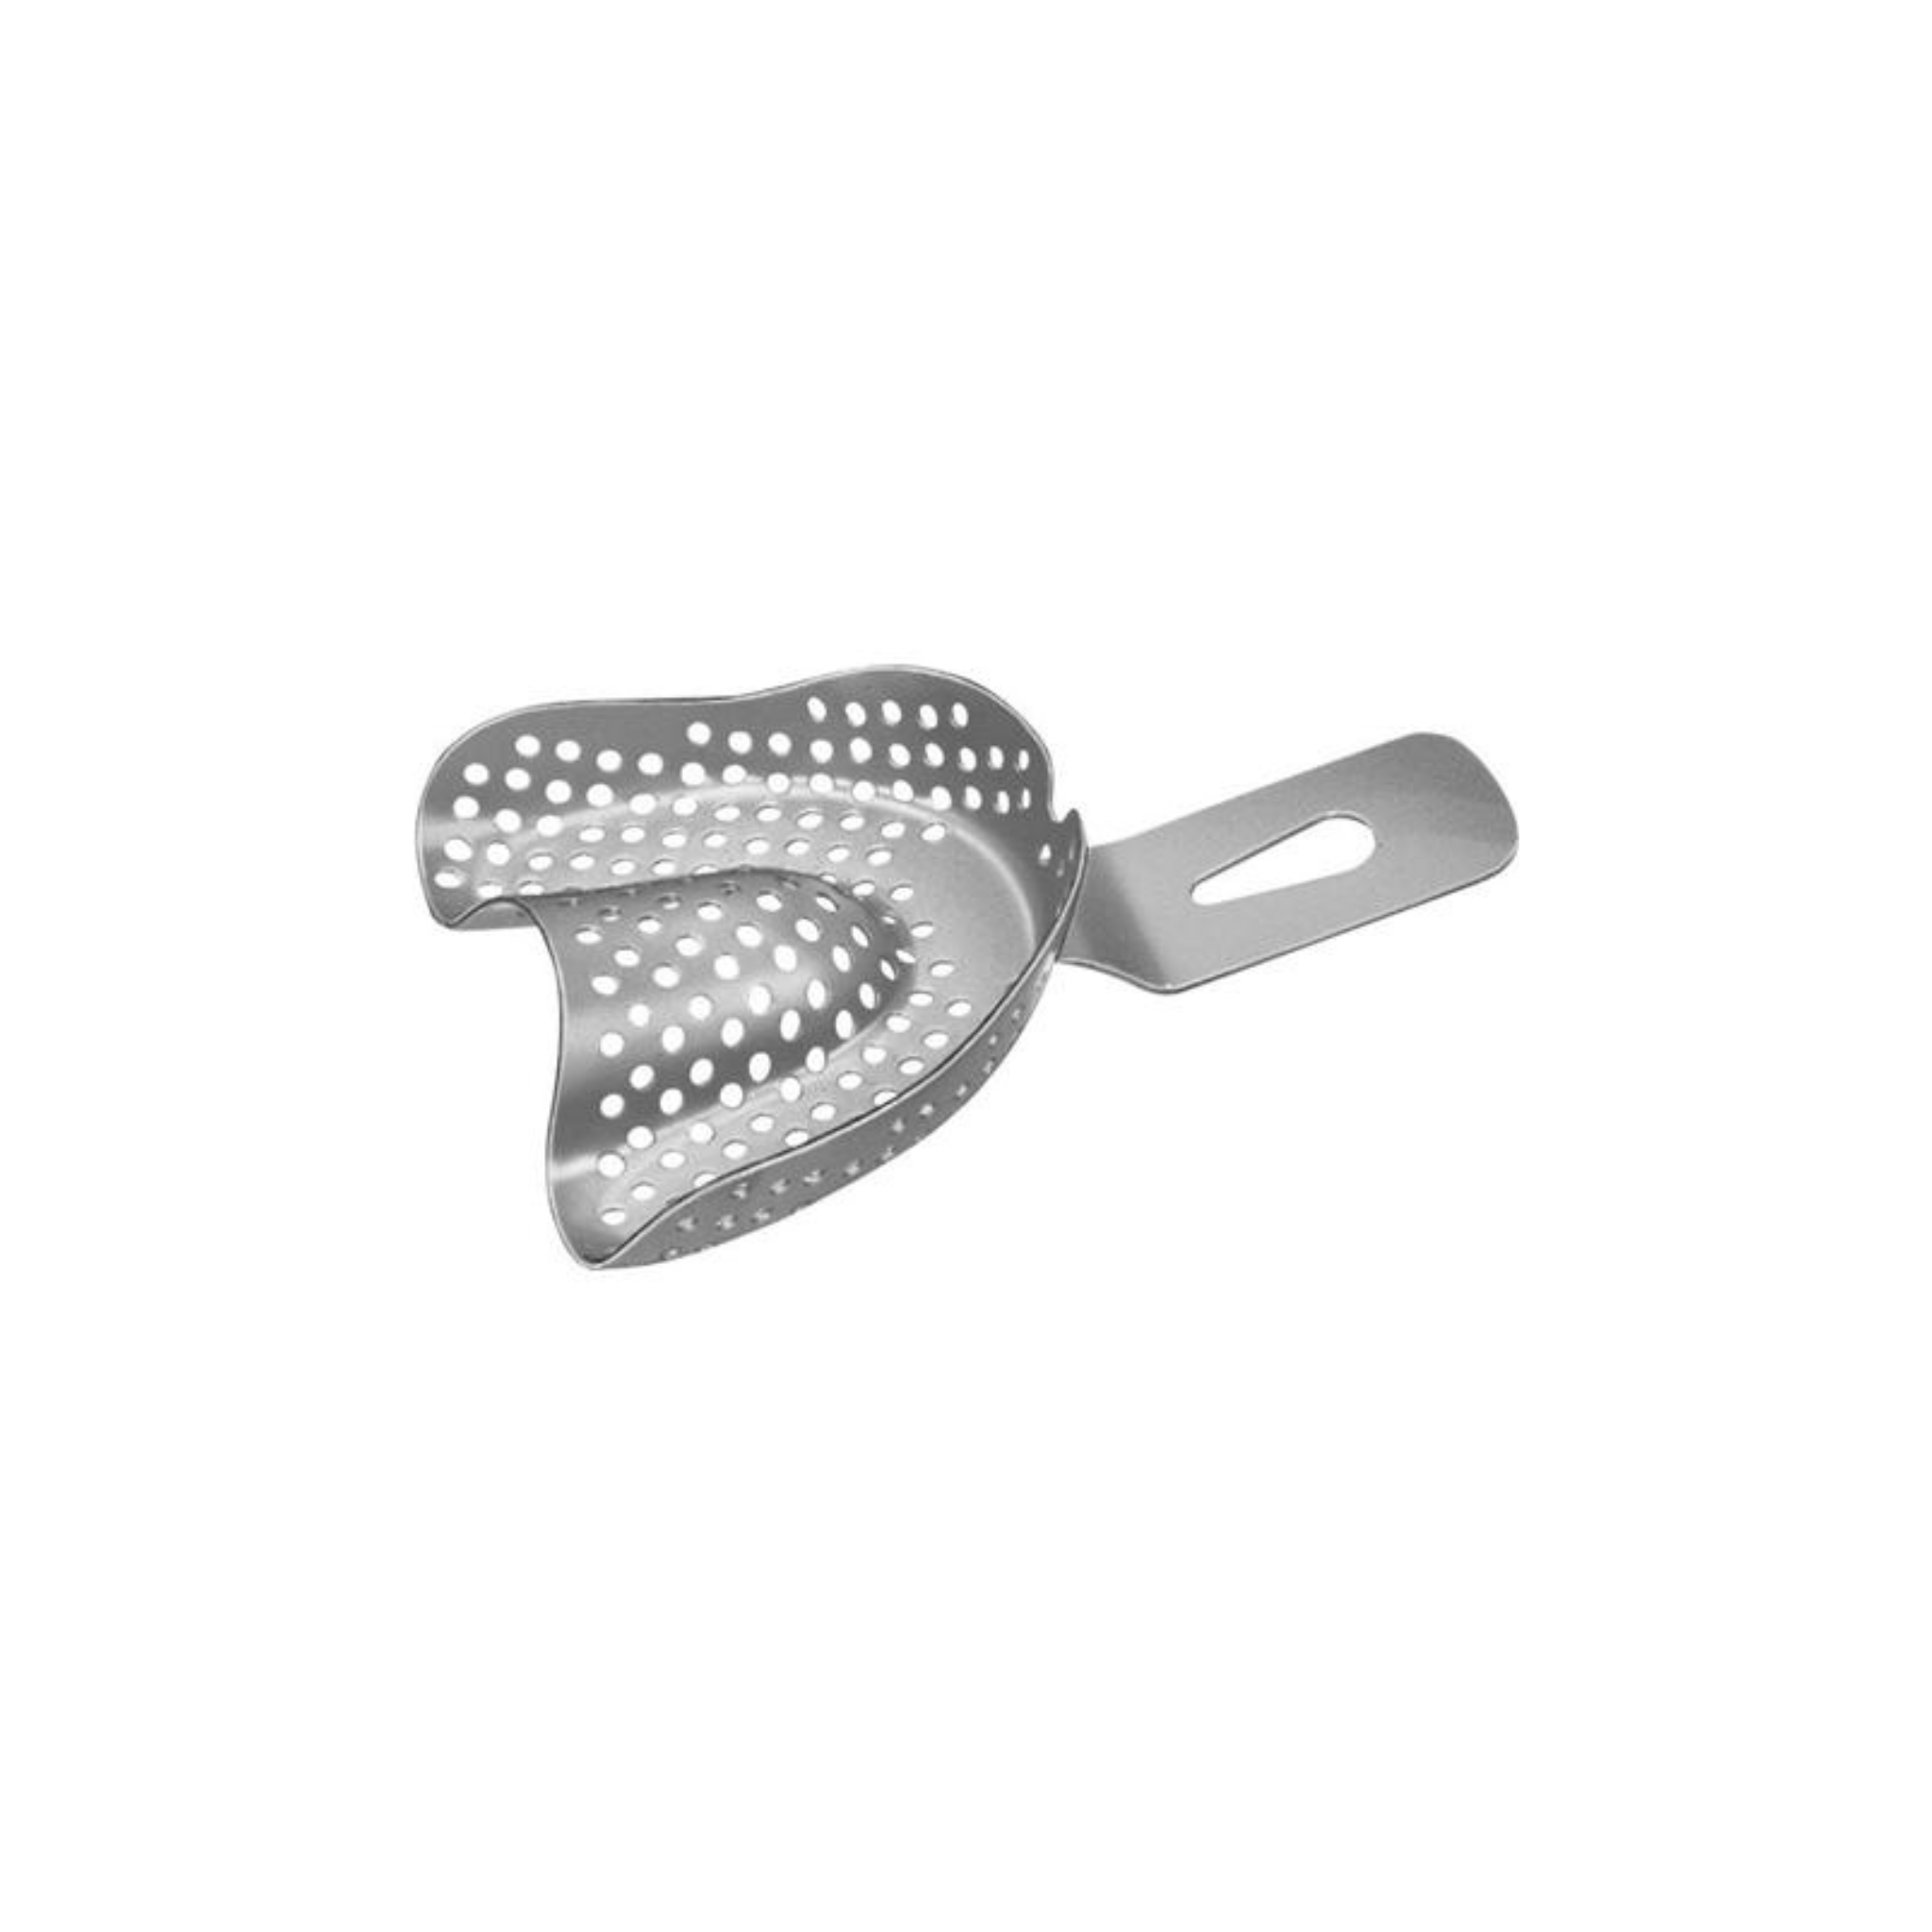 Jesco-Form impression tray<br> Perforated